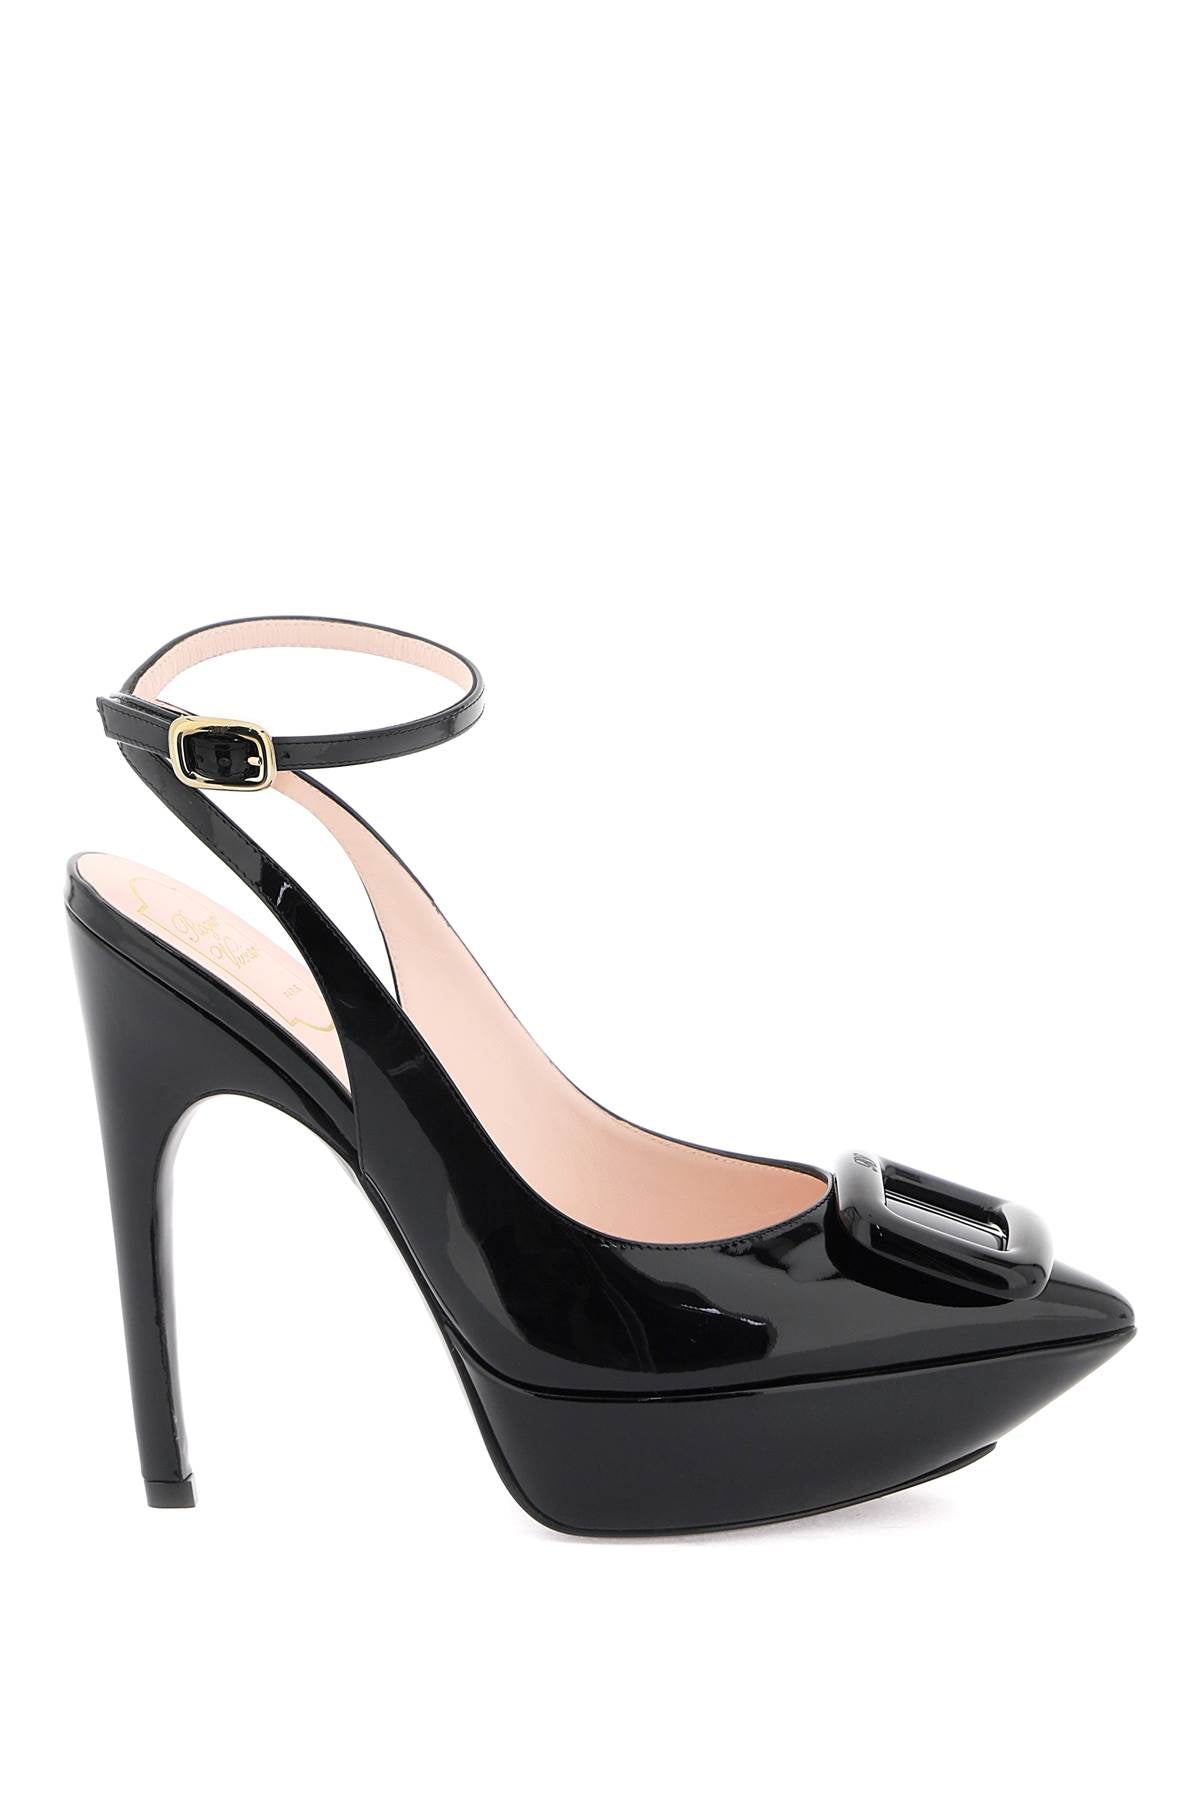 ROGER VIVIER Sleek and Sophisticated Black Patent Leather Pumps for Women